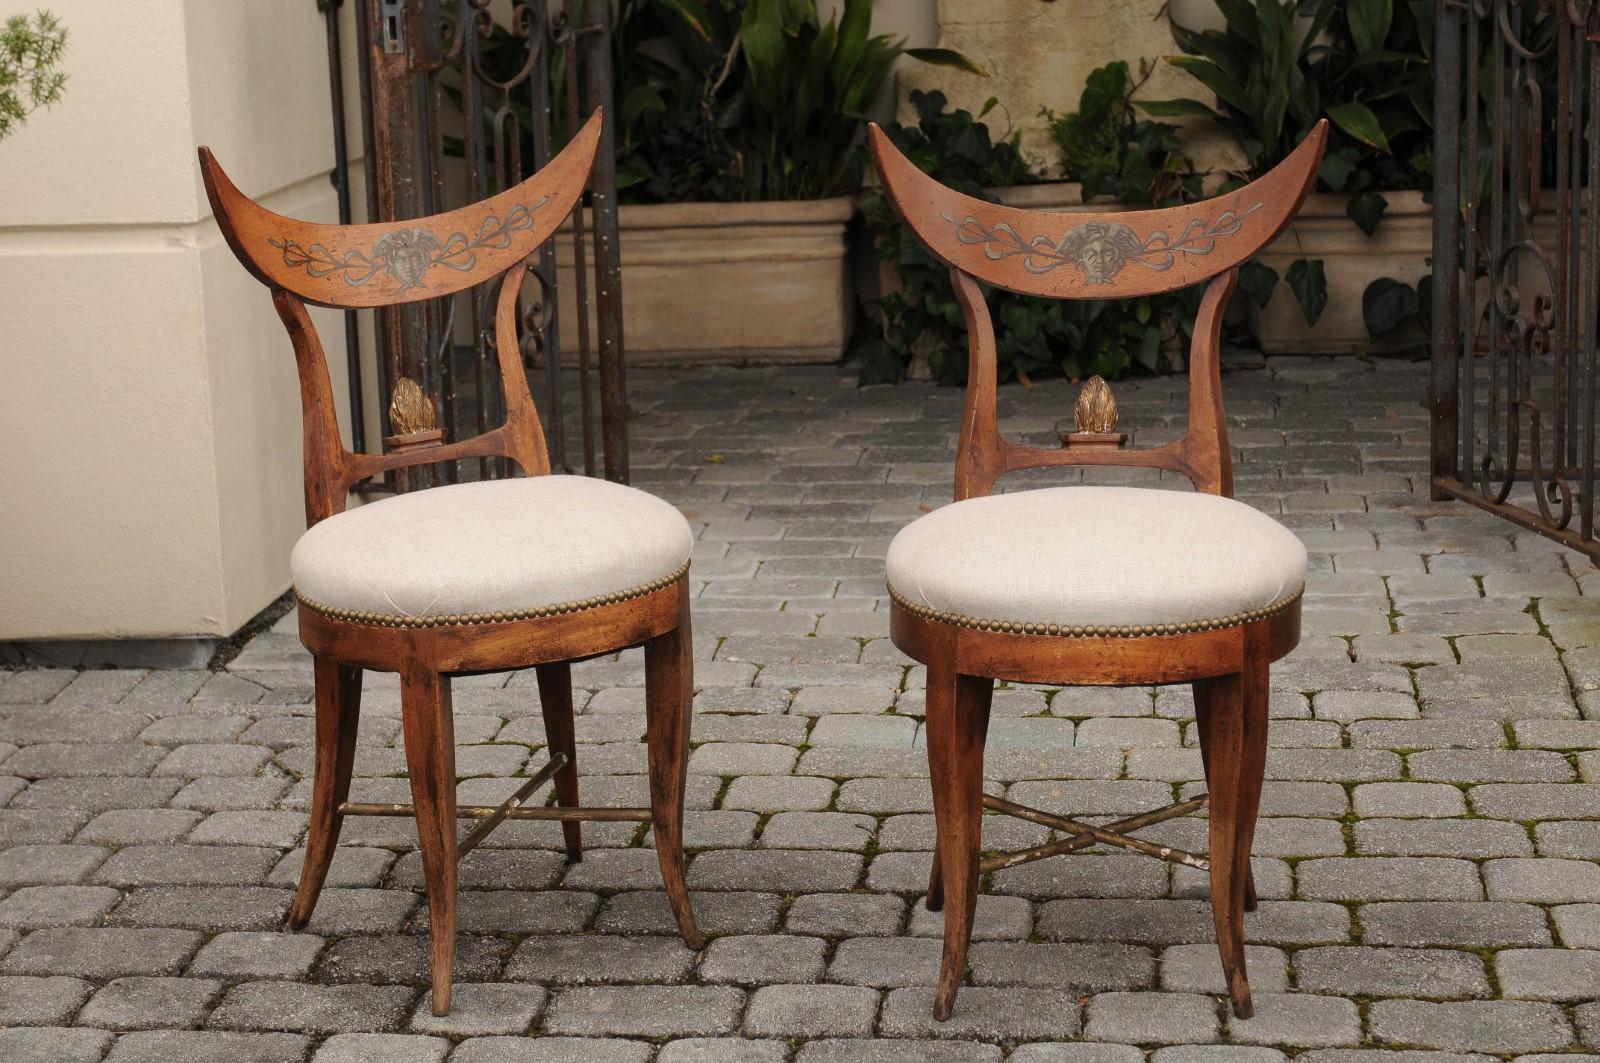 A pair of Italian side chairs from the mid-19th century, with crescent shaped backs, new linen upholstered seats and saber legs. Born in Italy during the third quarter of the 19th century, each of this pair of unusual Italian chairs features a